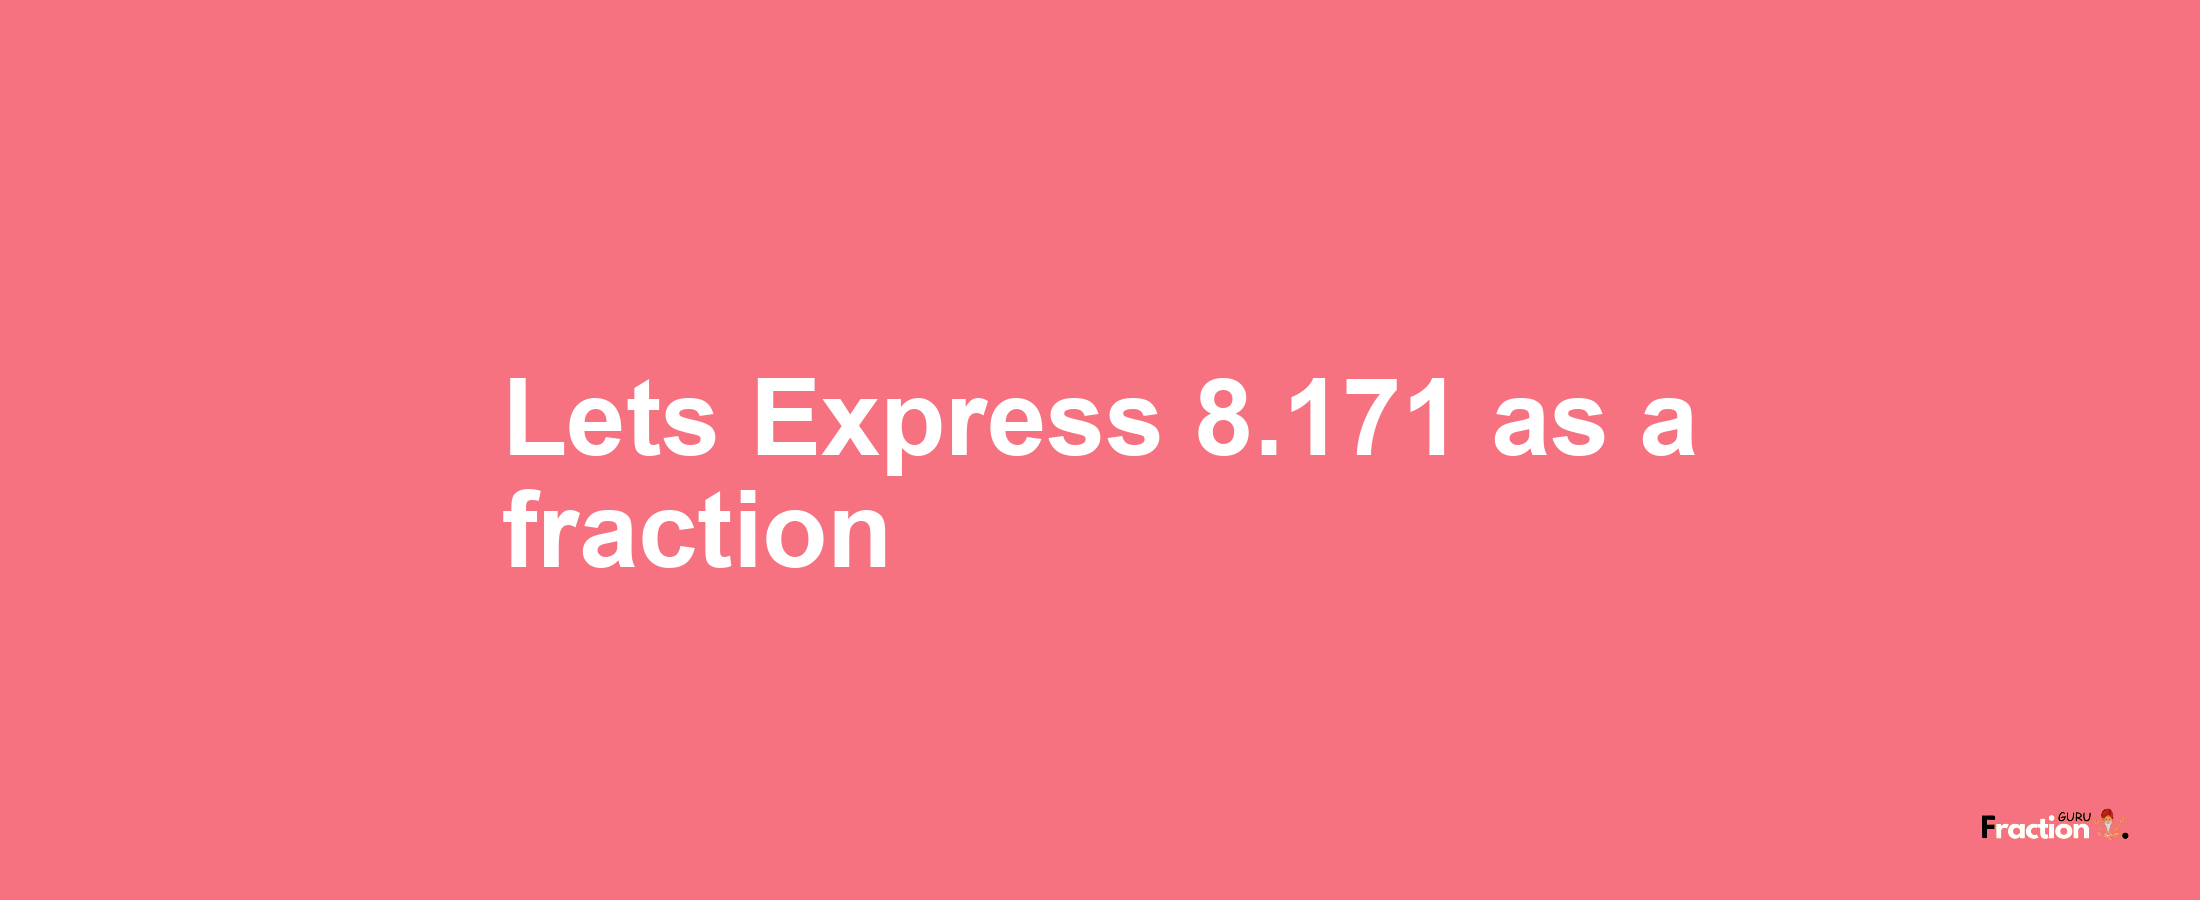 Lets Express 8.171 as afraction